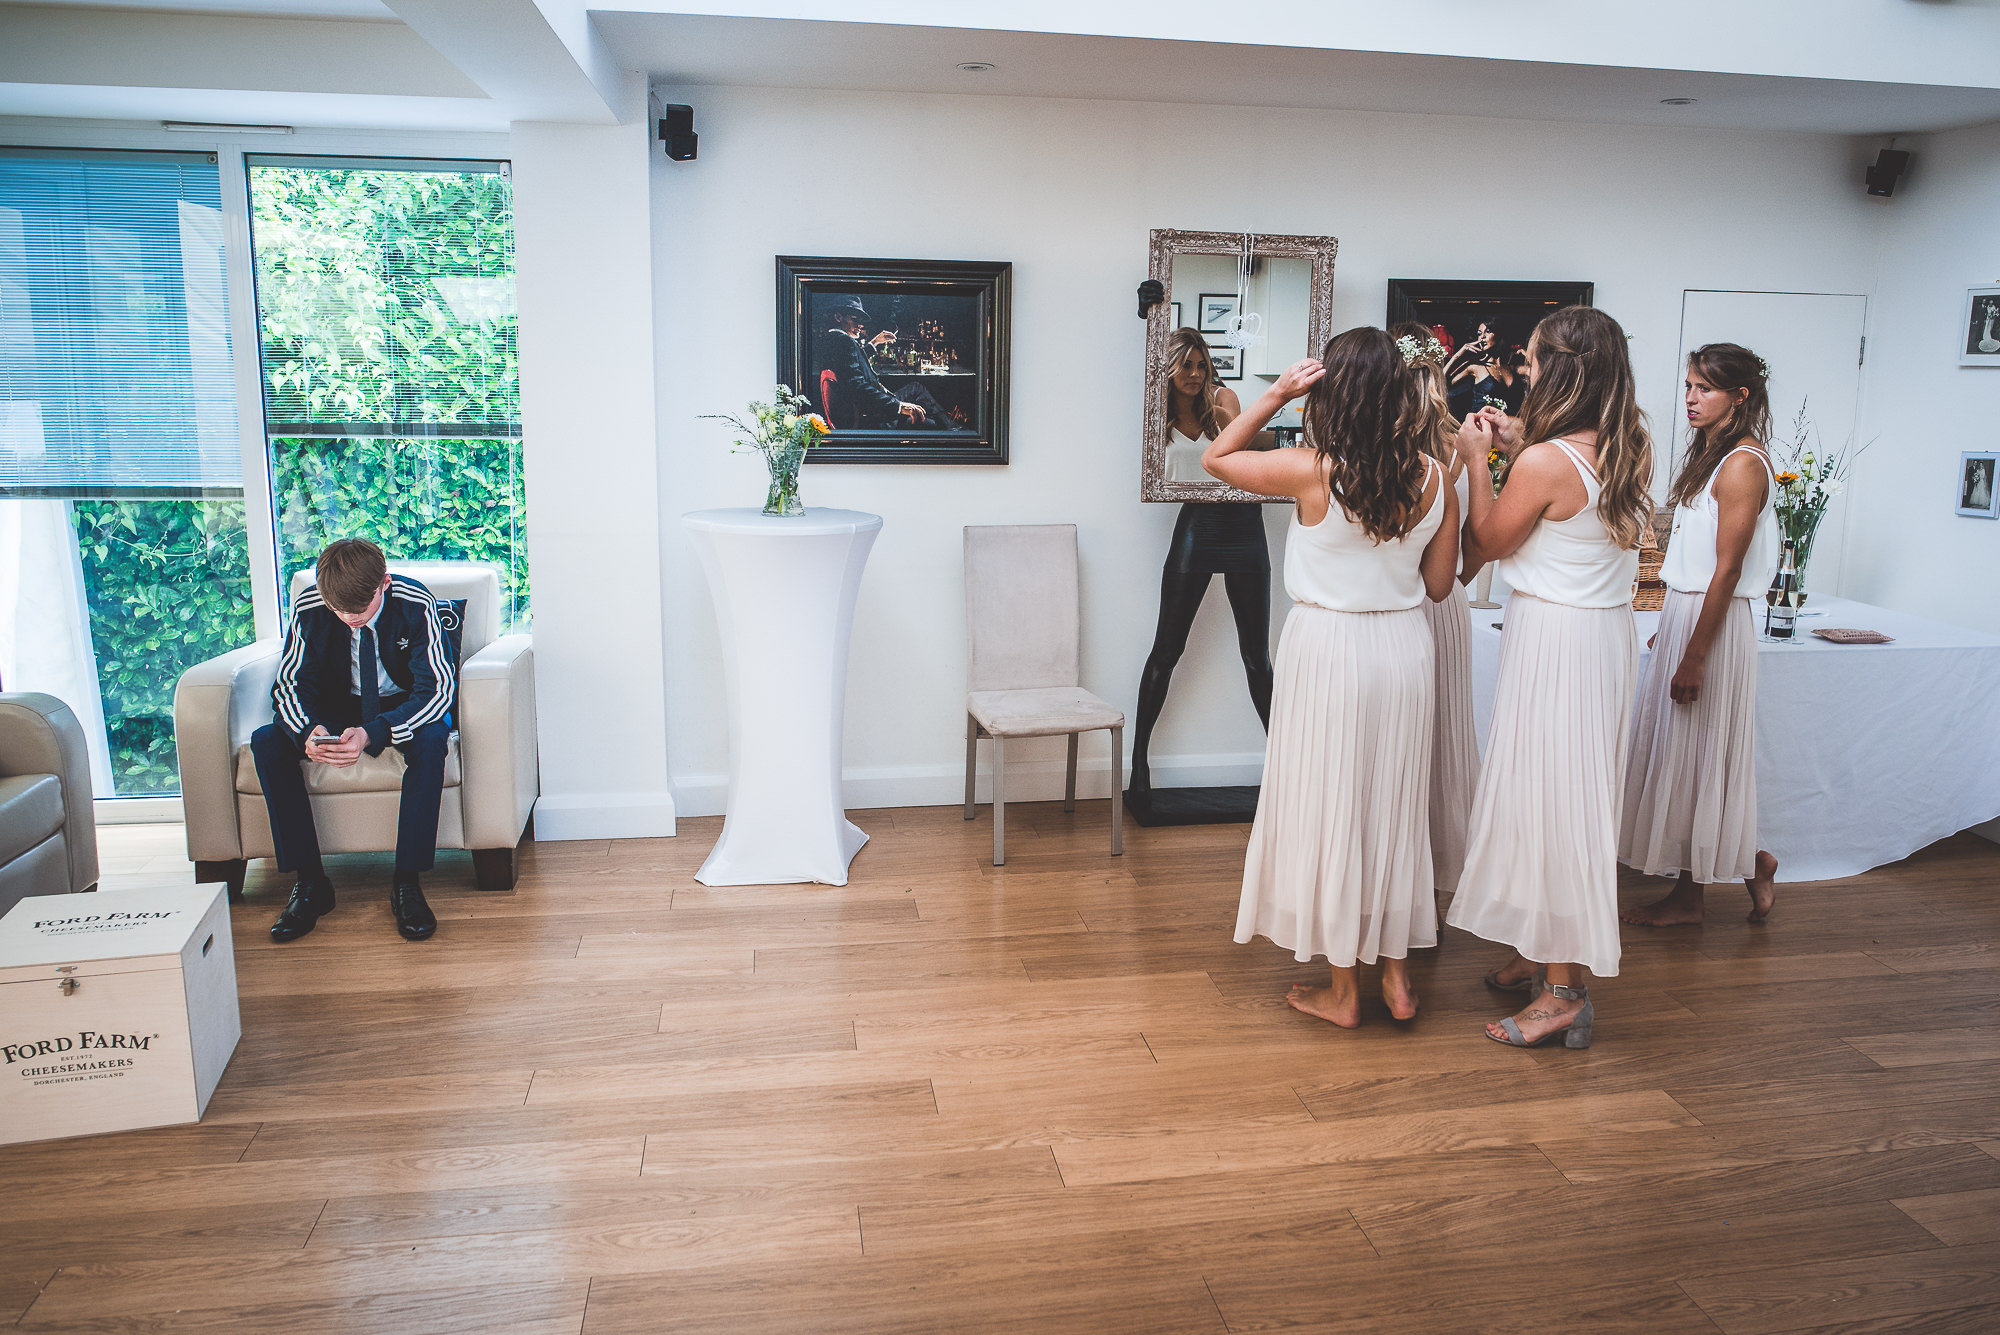 A group of bridesmaids standing in front of a mirror during a wedding.